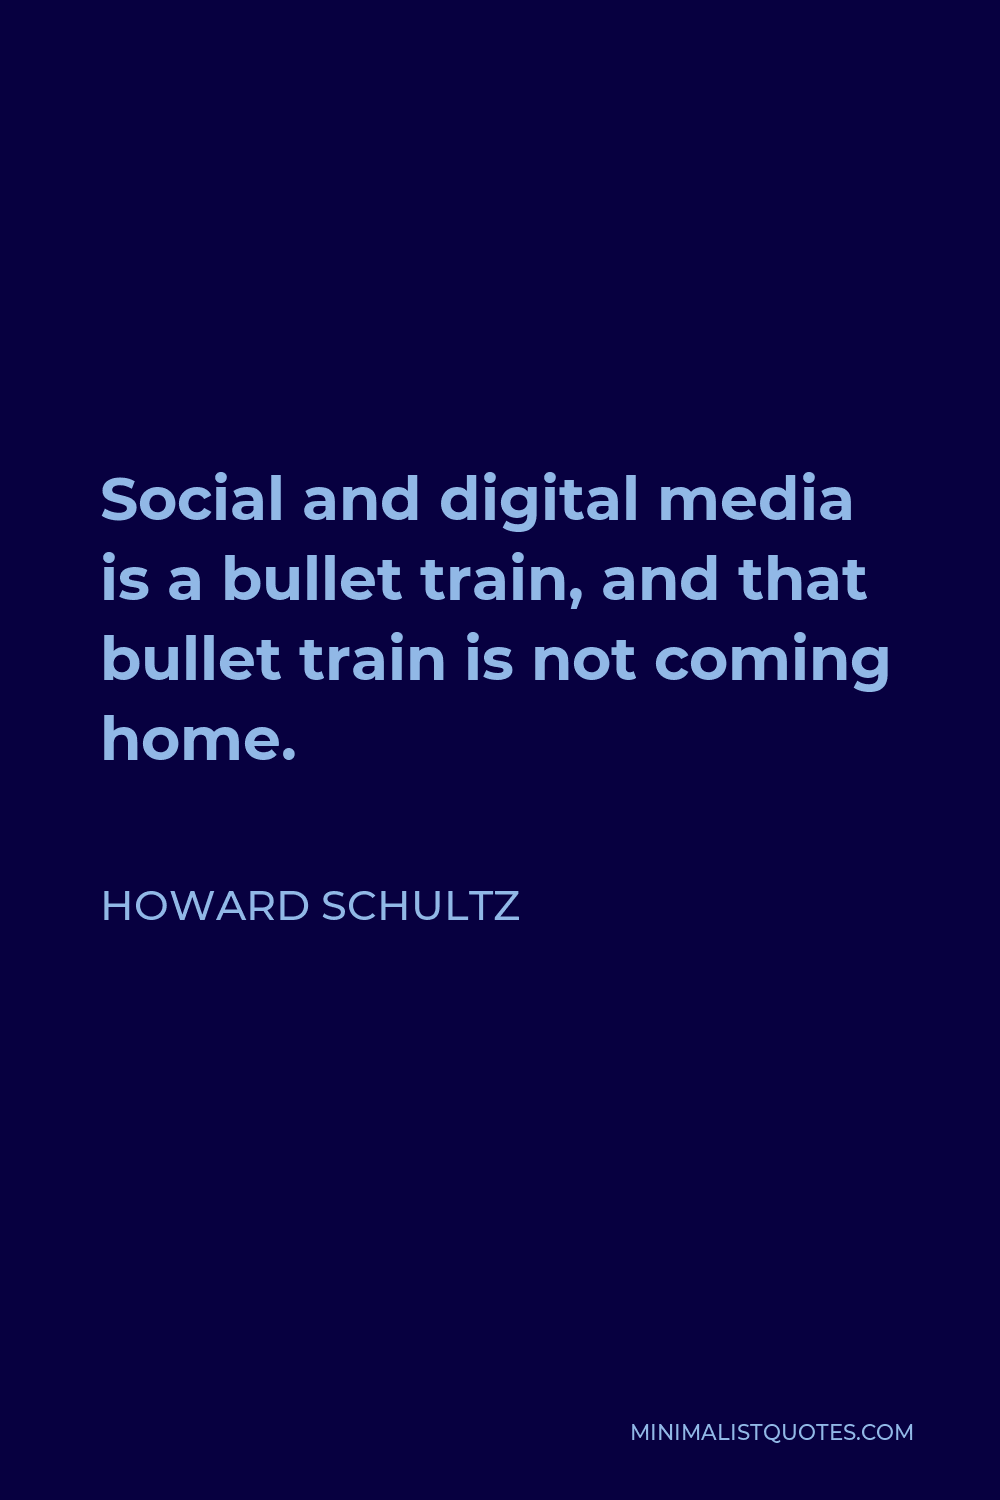 Howard Schultz Quote - Social and digital media is a bullet train, and that bullet train is not coming home.